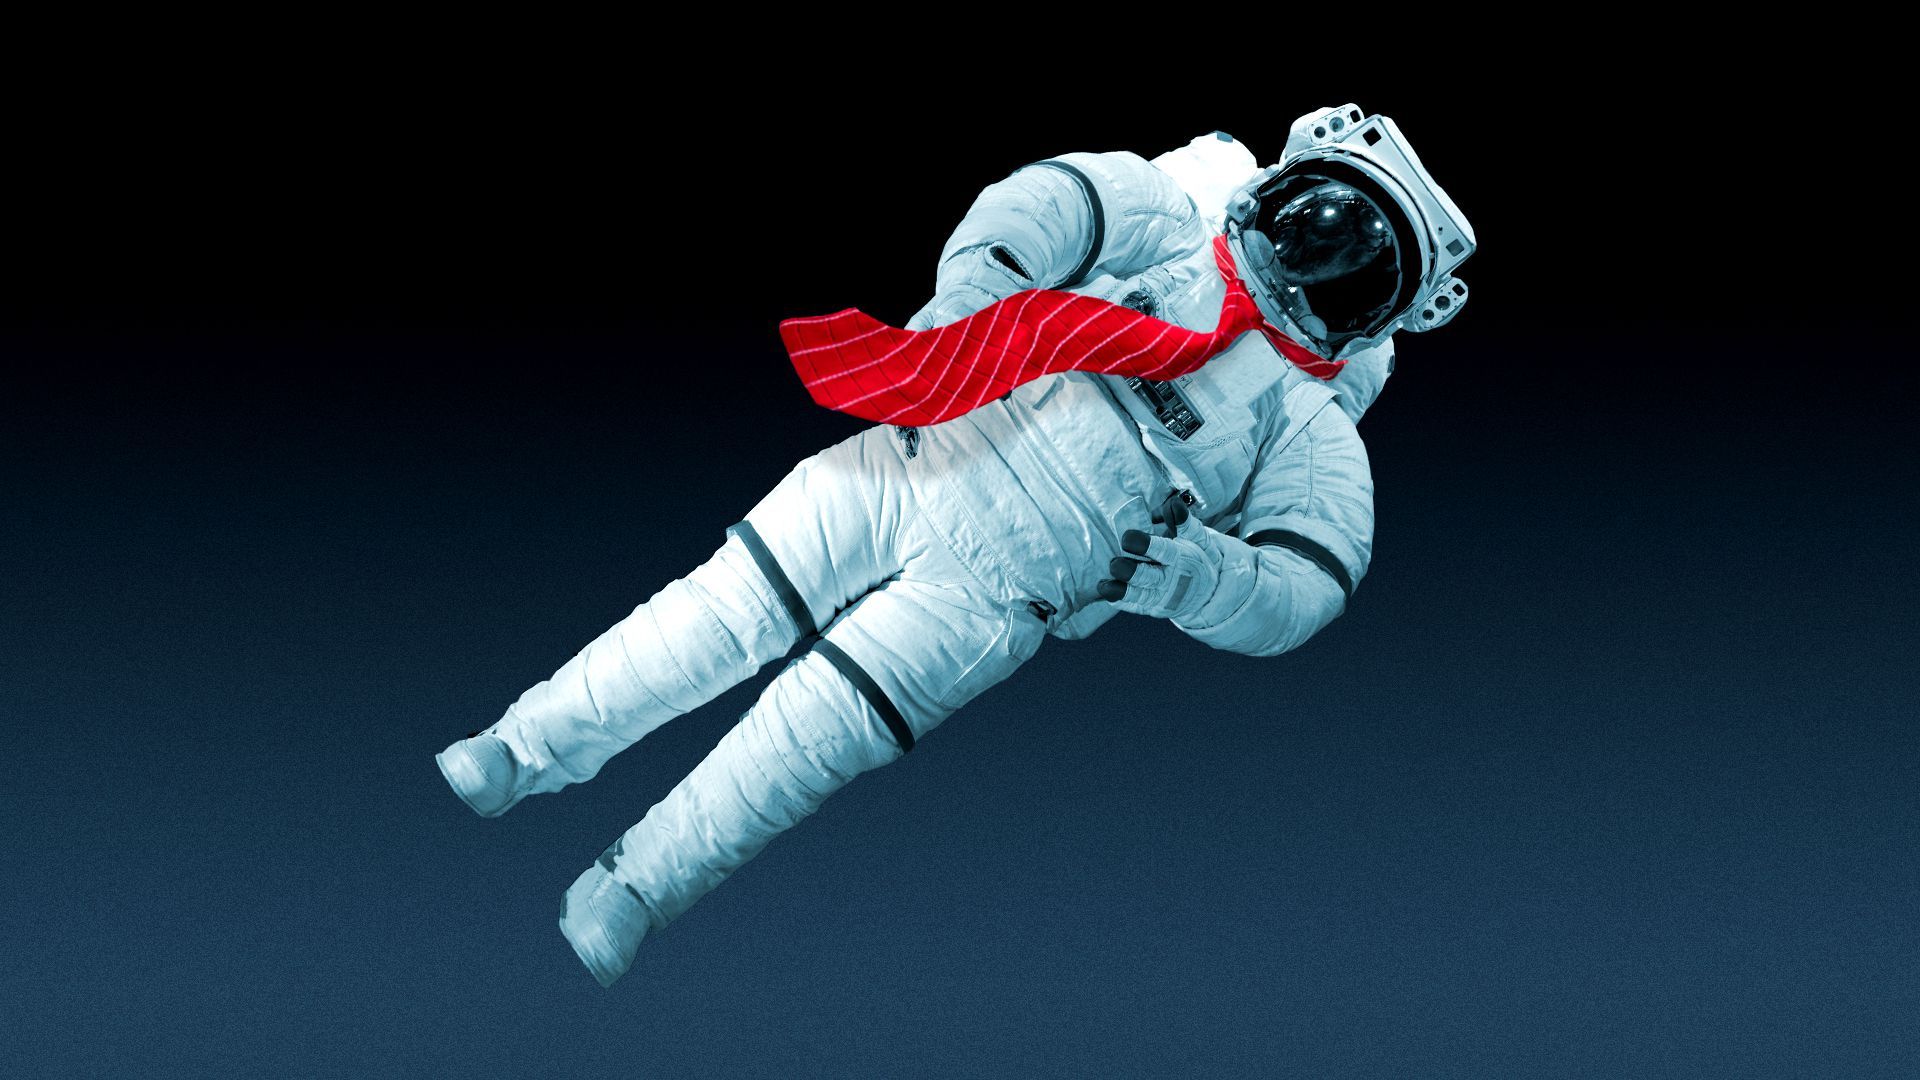 Illustration of an astronaut wearing a necktie floating through space